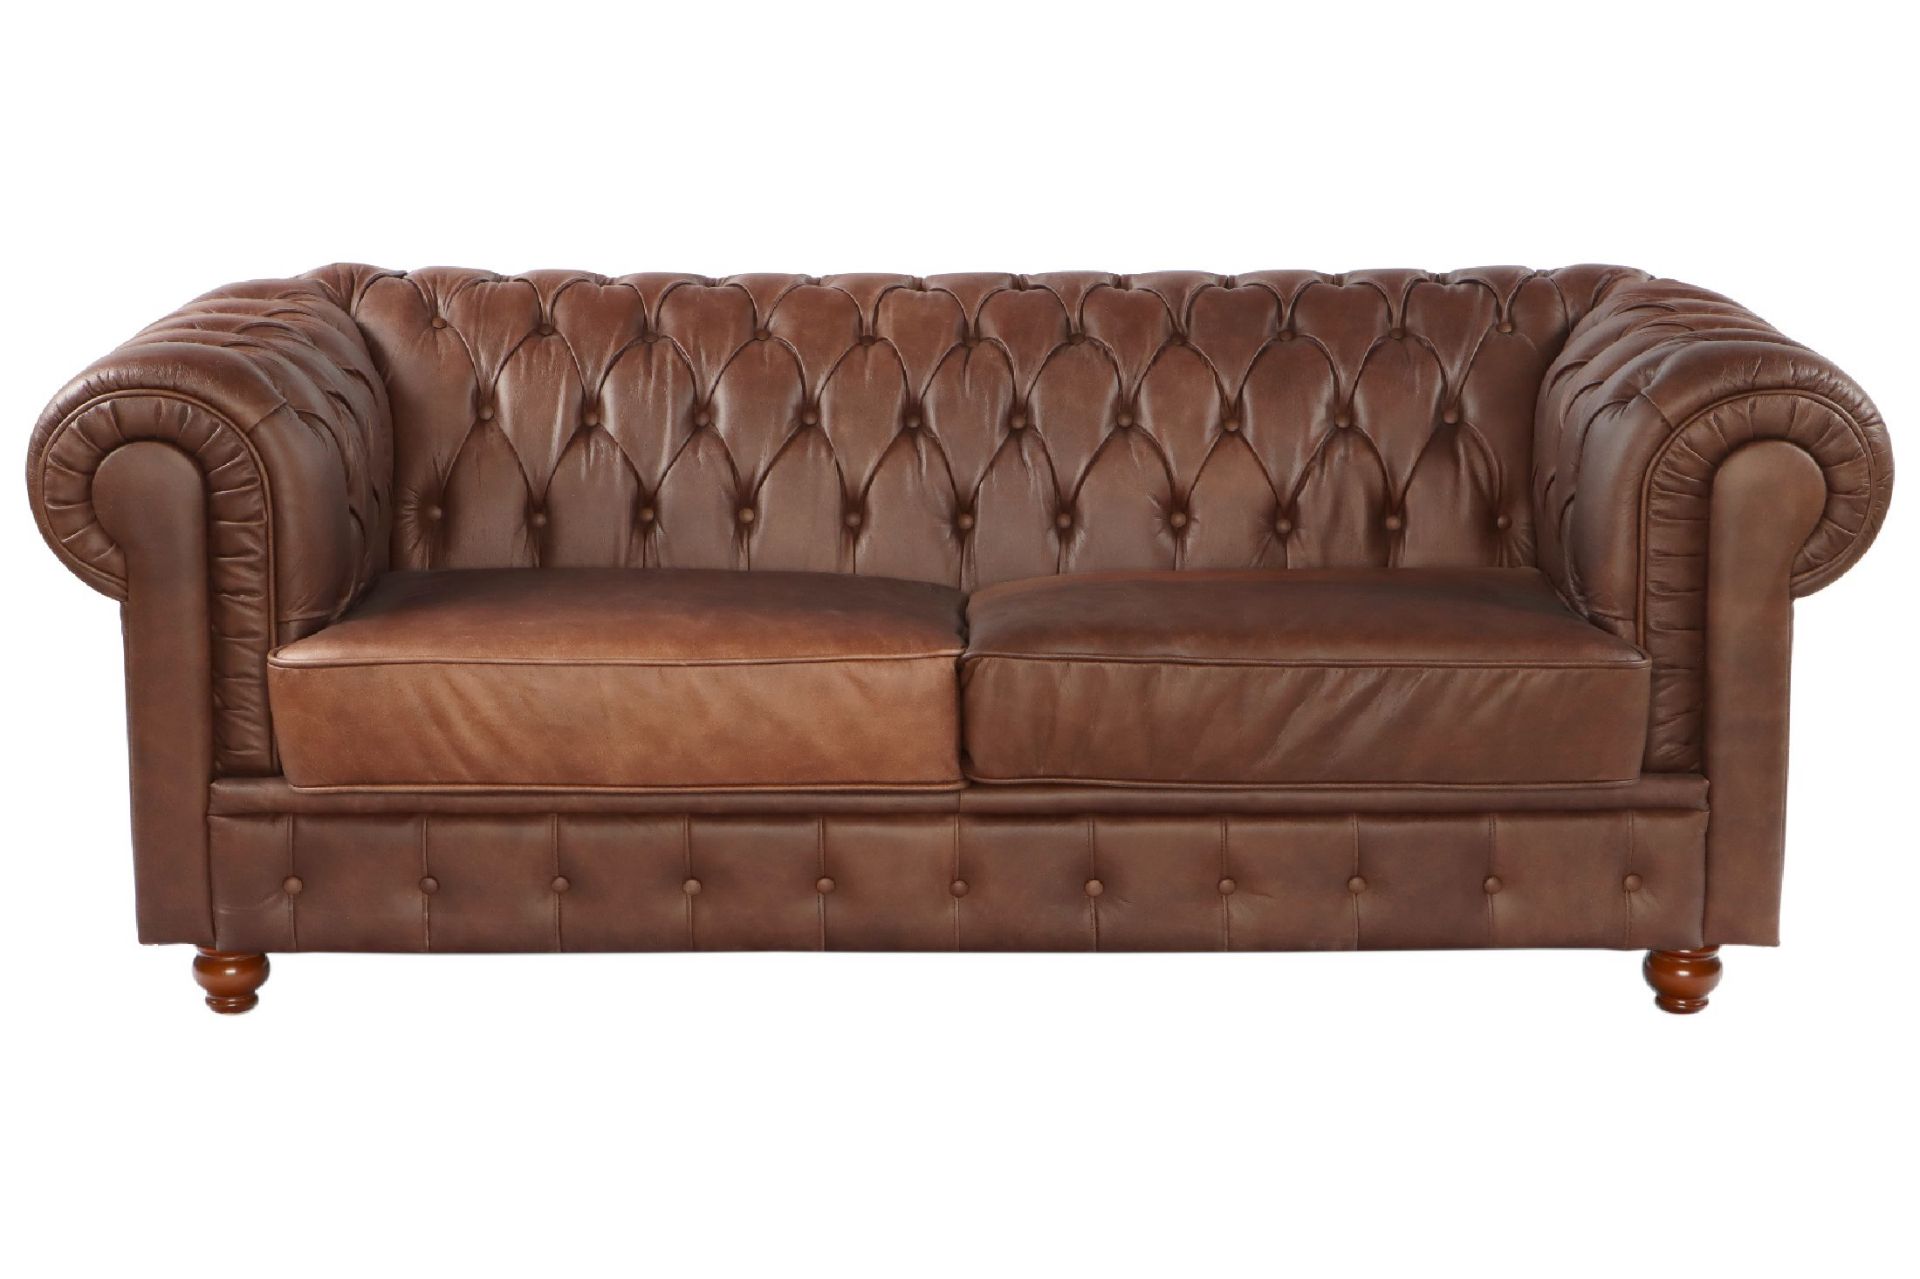 Chesterfieldsofa,  2-Sitzer, braune Lederbezüge, Rücken,